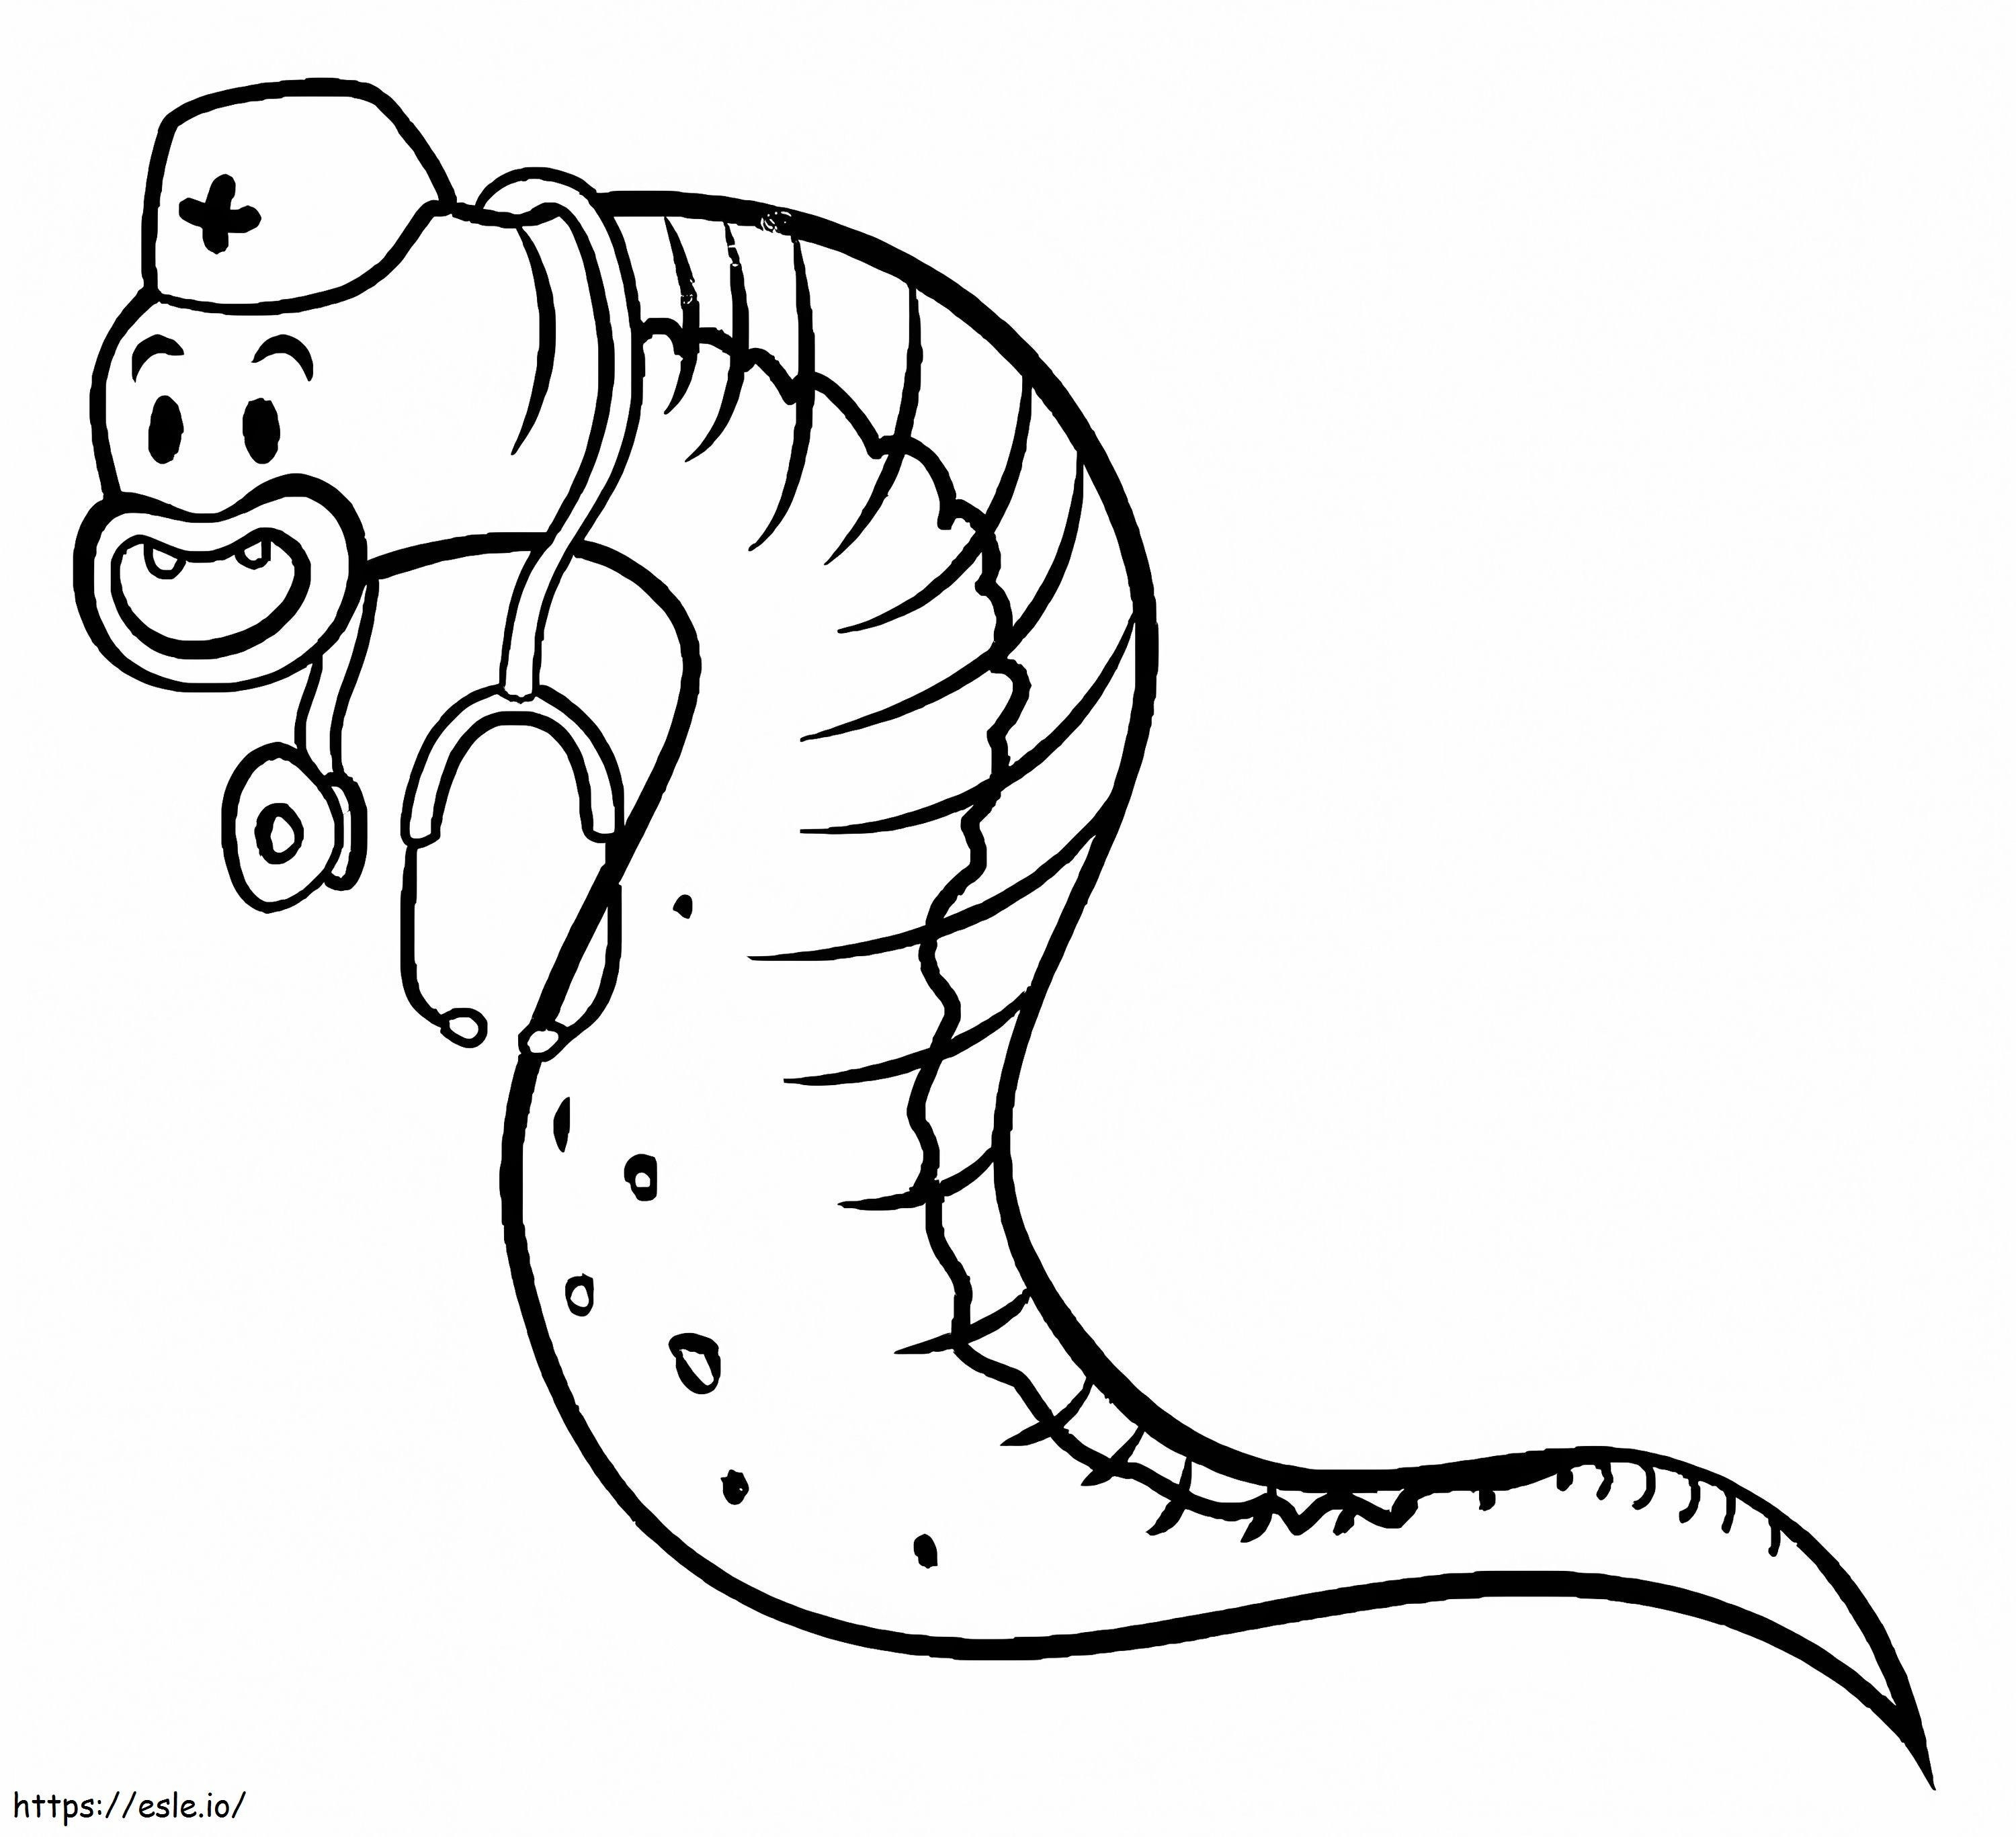 Doctor Leech coloring page